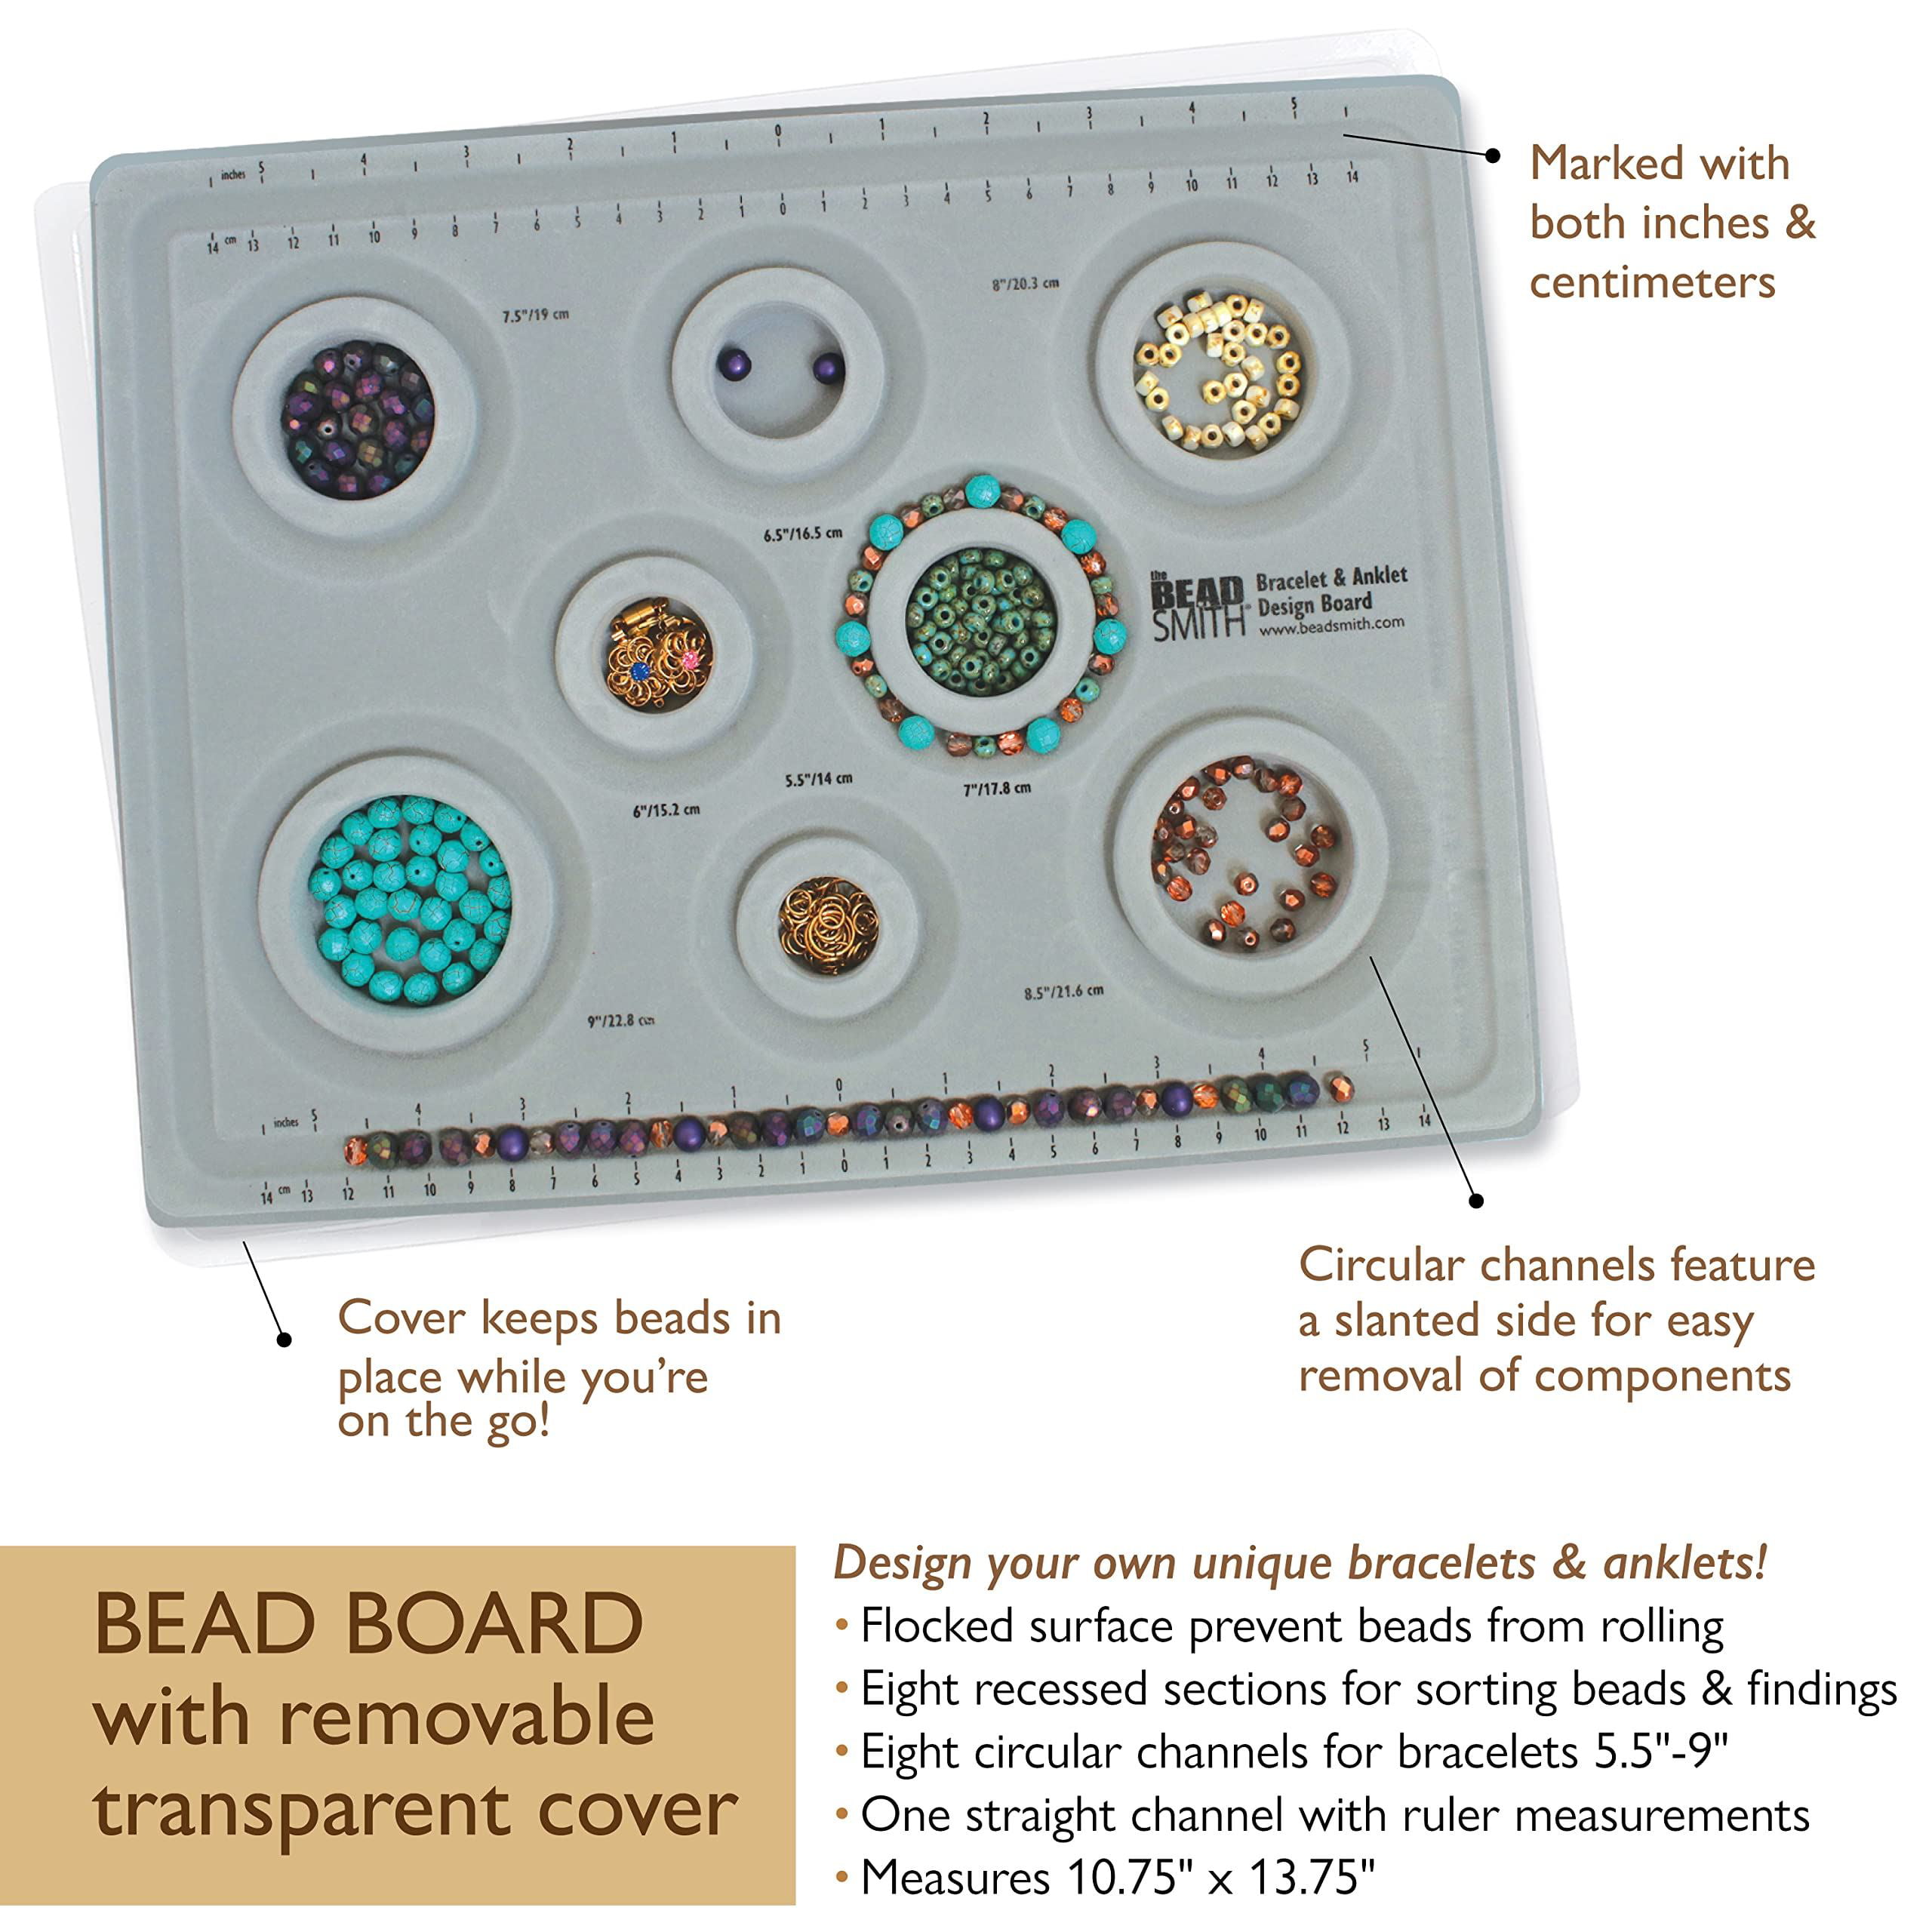 The Beadsmith Bead Board with Cover, Grey Flocked, 3 U-Shaped Channels, 6  Recessed Compartments, 9.75 x 13.25 inches, Design Boards for Creating  Bracelets, Necklaces and Other Jewelry